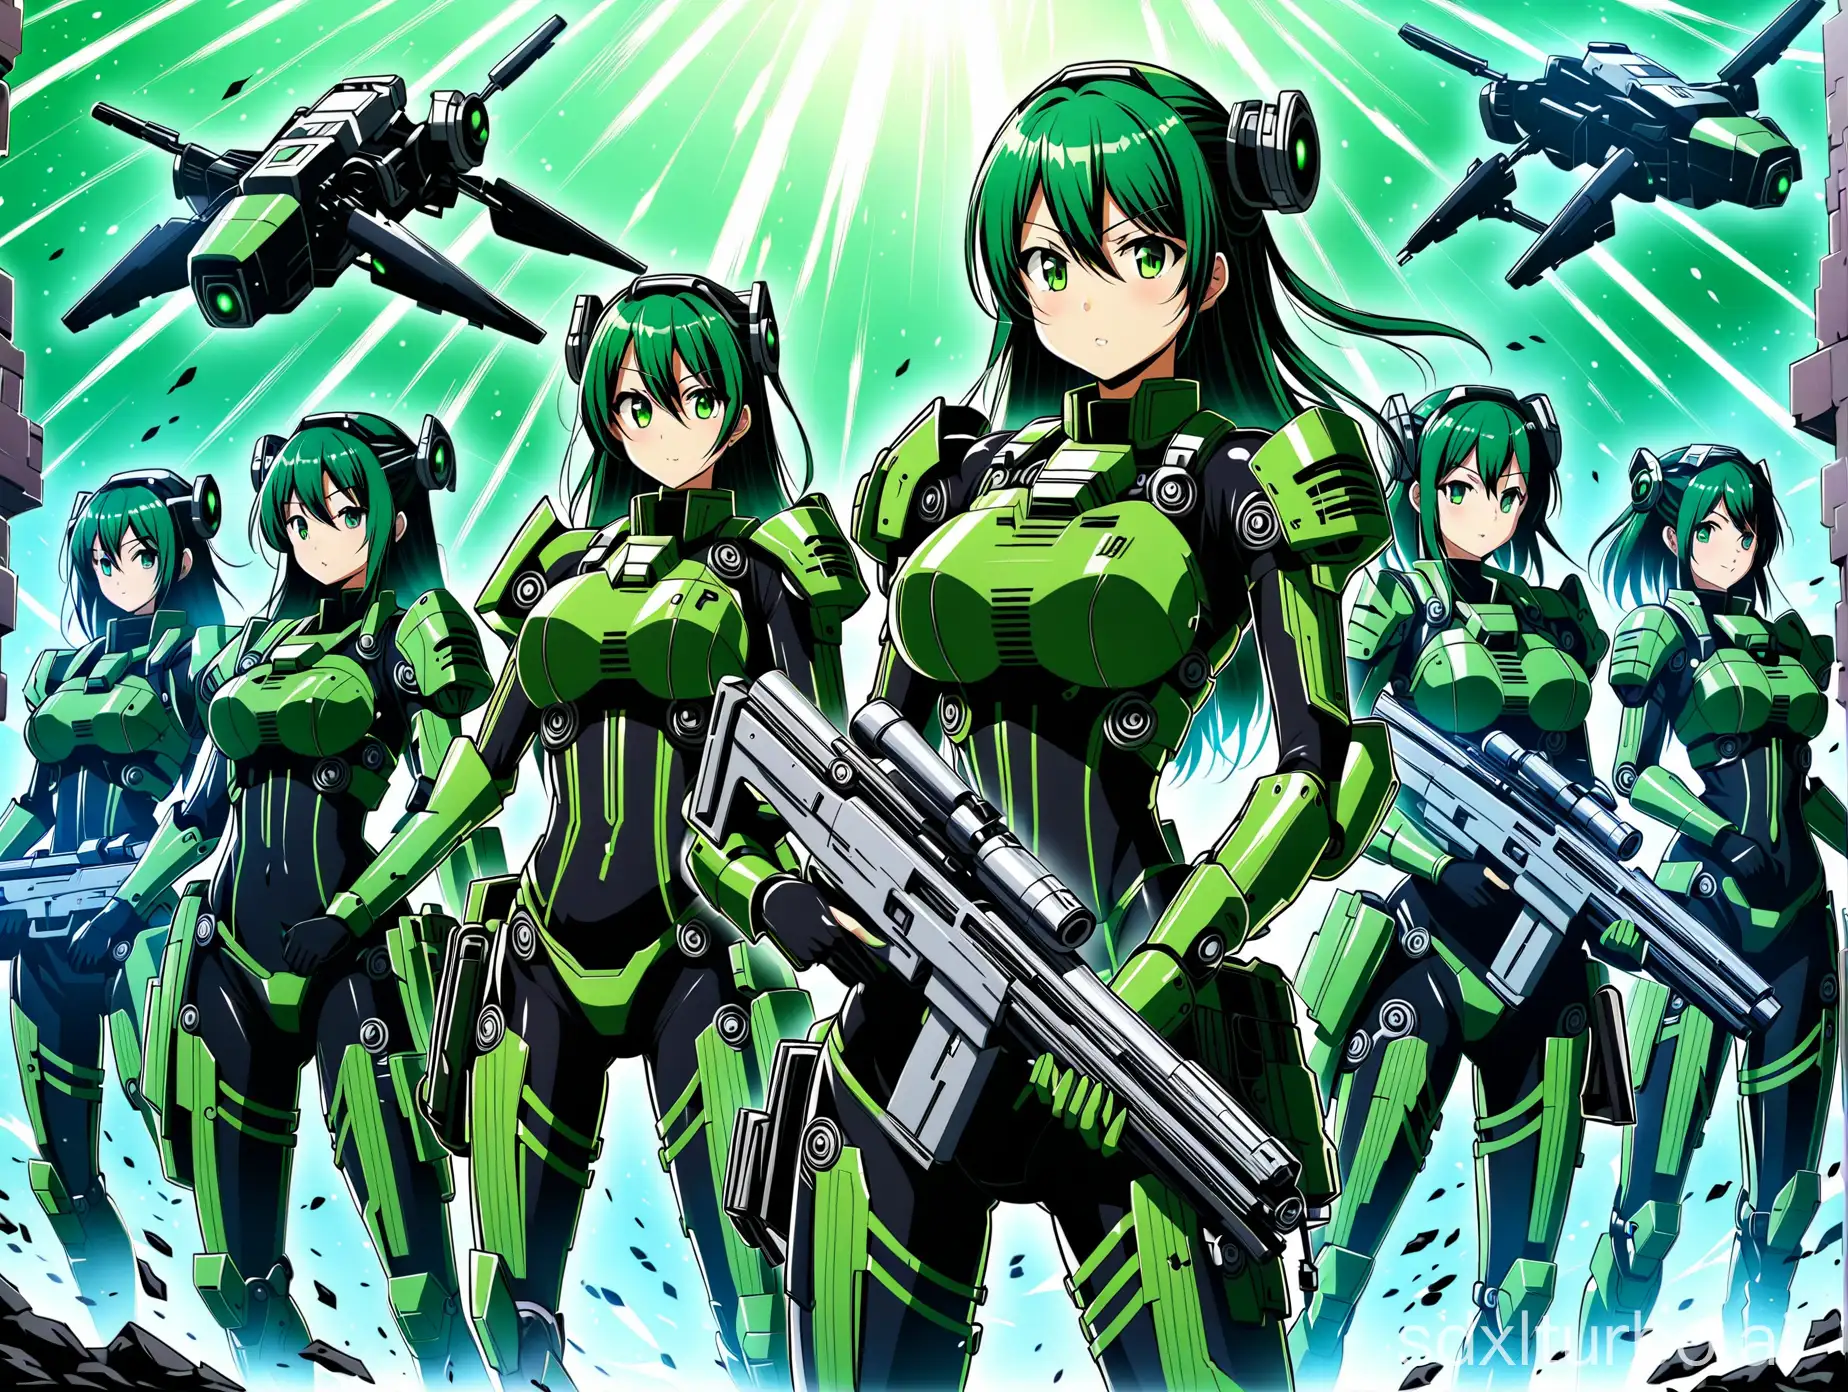 Anime-Girls-Borg-Drone-Army-with-Blaster-Weapons